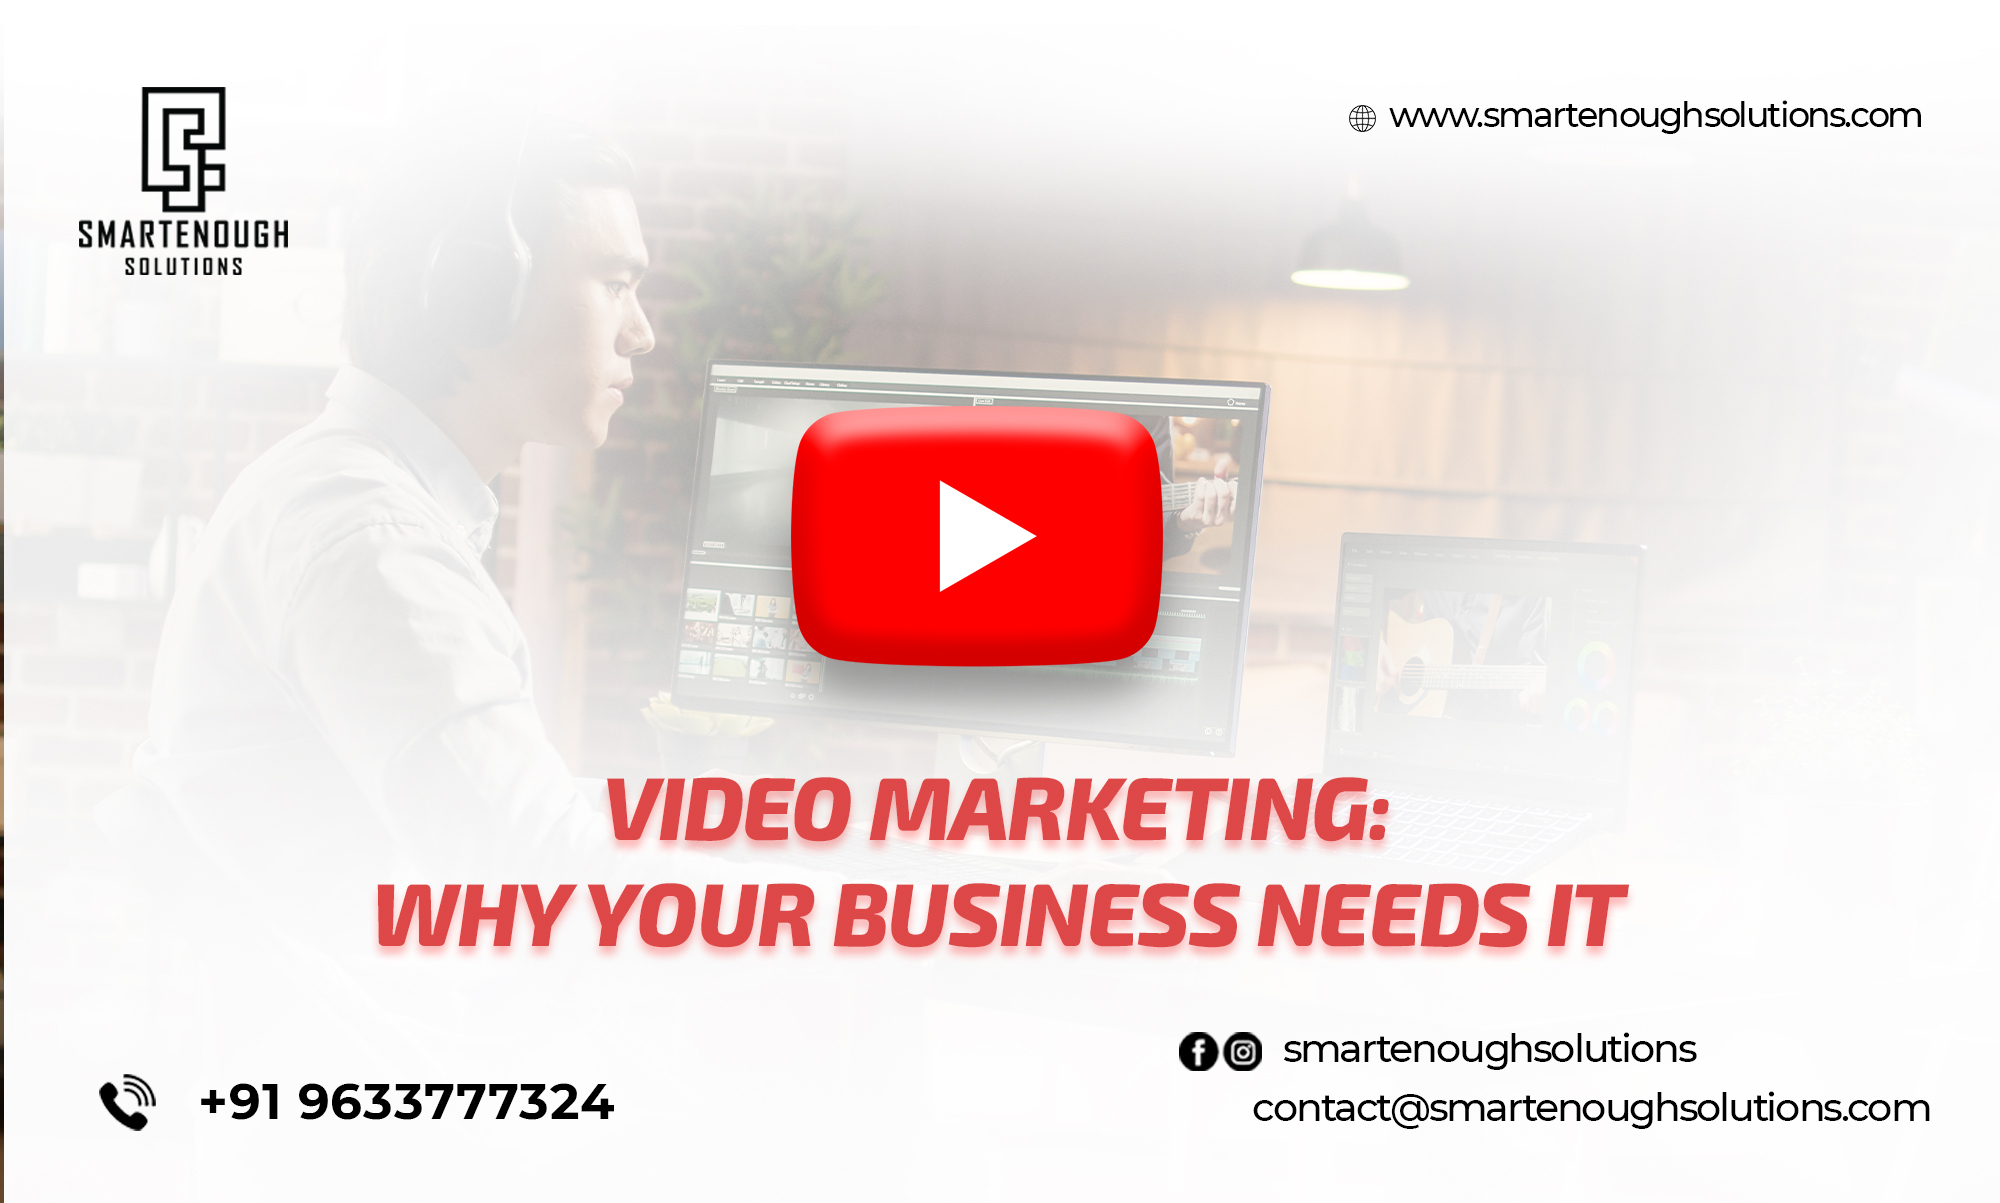 Video Marketing: Why Your Business Needs It